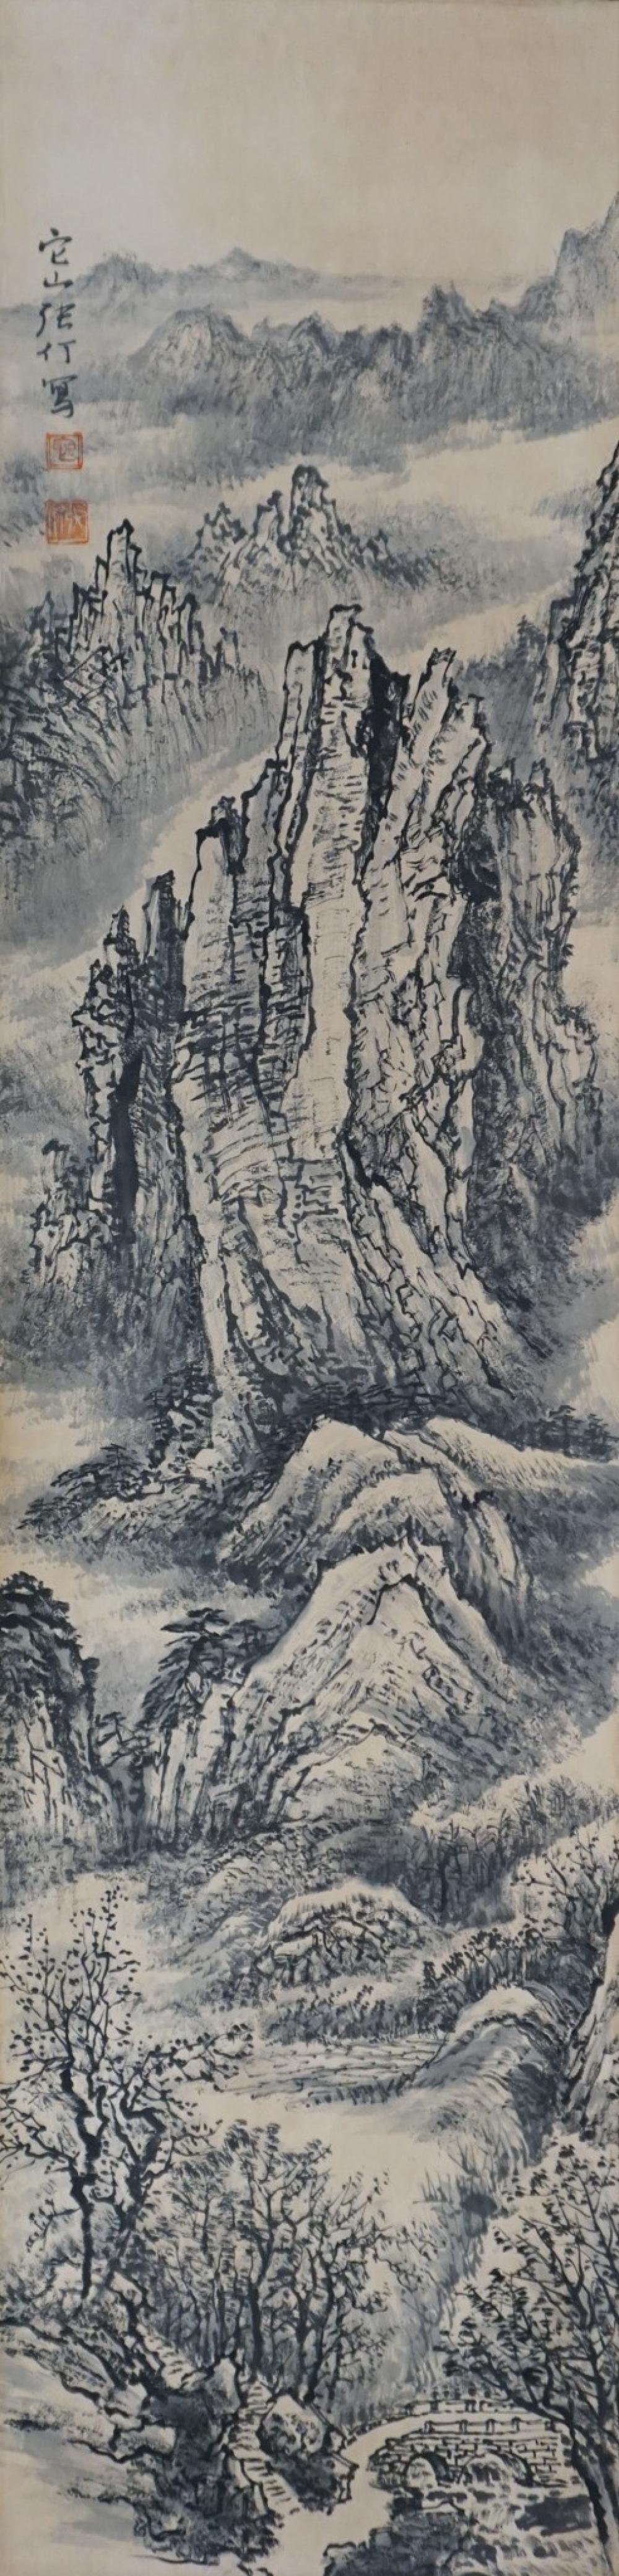 CHINESE HANGING SCROLL OF MOUNTAIN 32c5cc